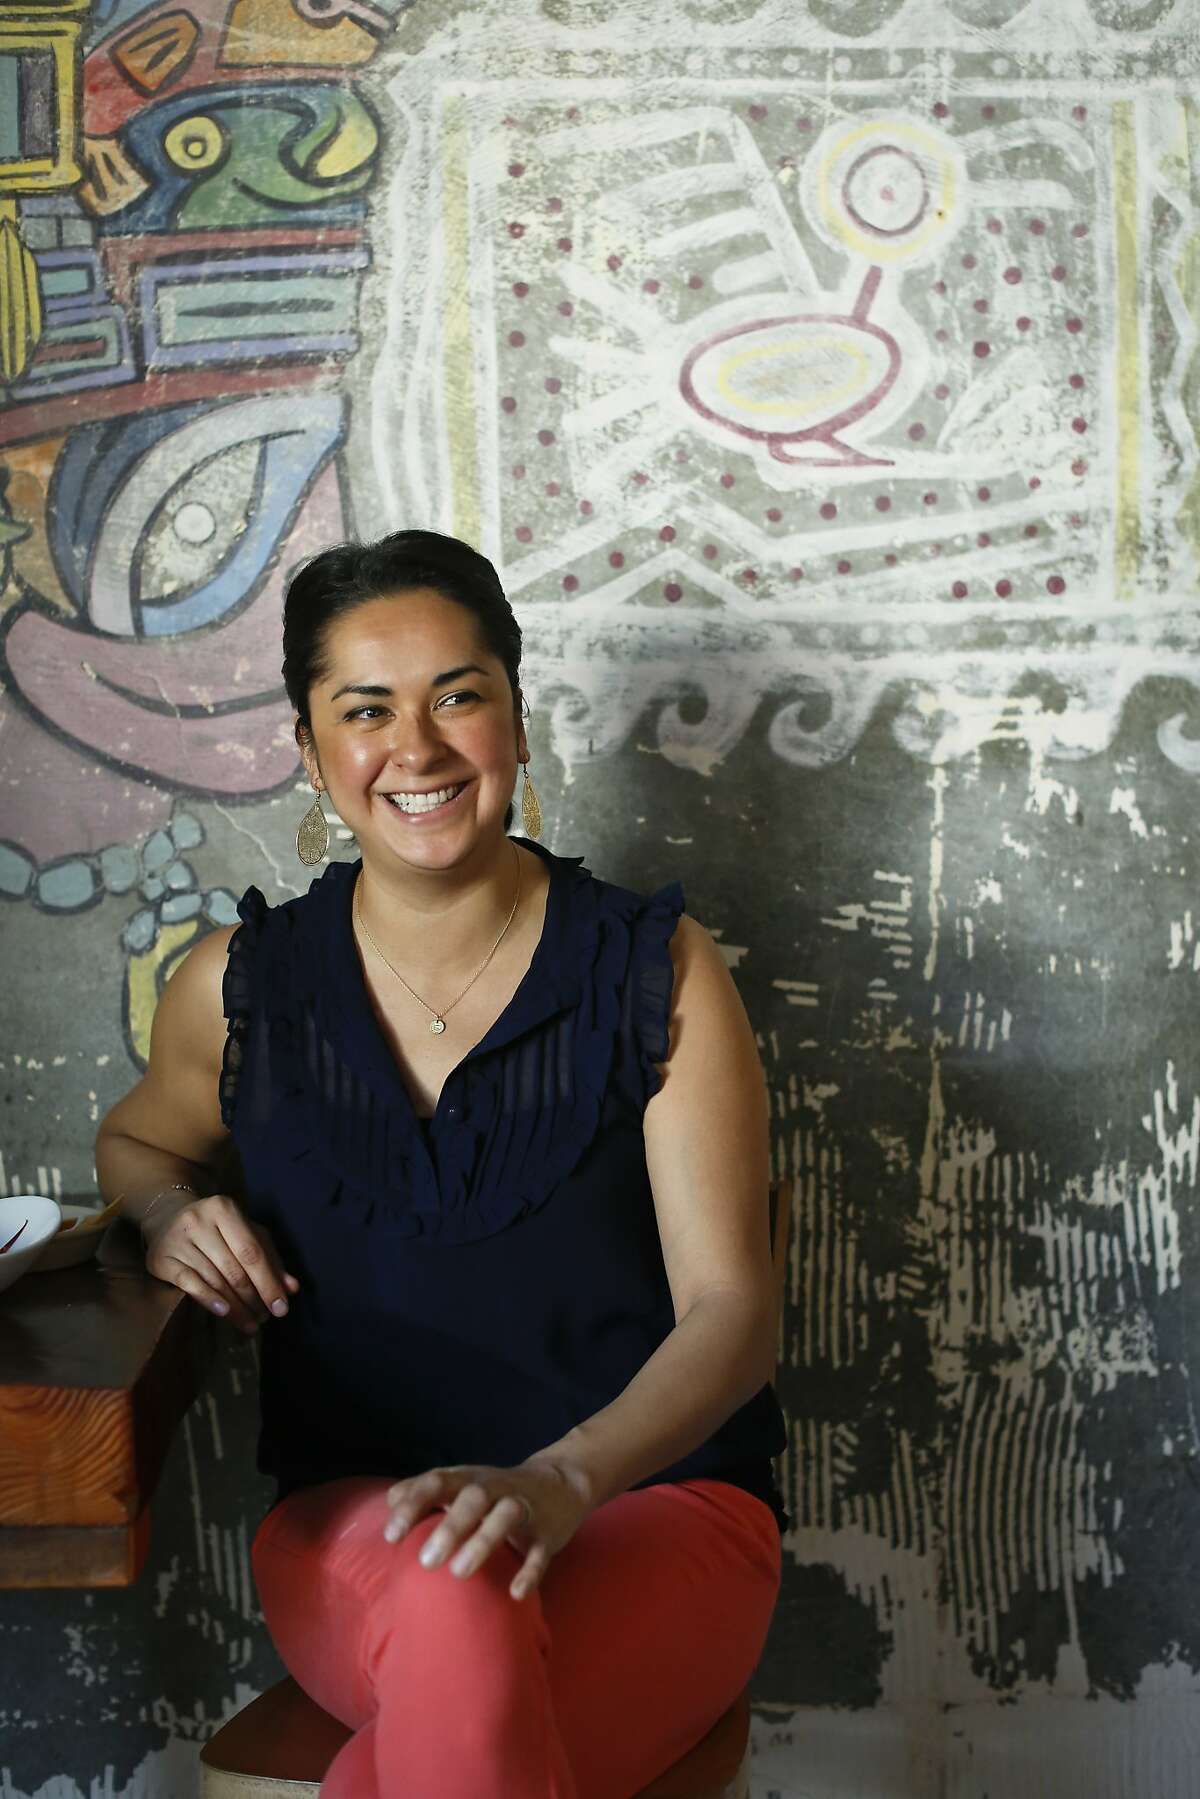 Chef Silvia McCollow of Nido in Oakland, Calif., talks, on Monday, April 7, 2014, about family road trips through Mexico when growing up and stopping in small towns to have eating adventures.